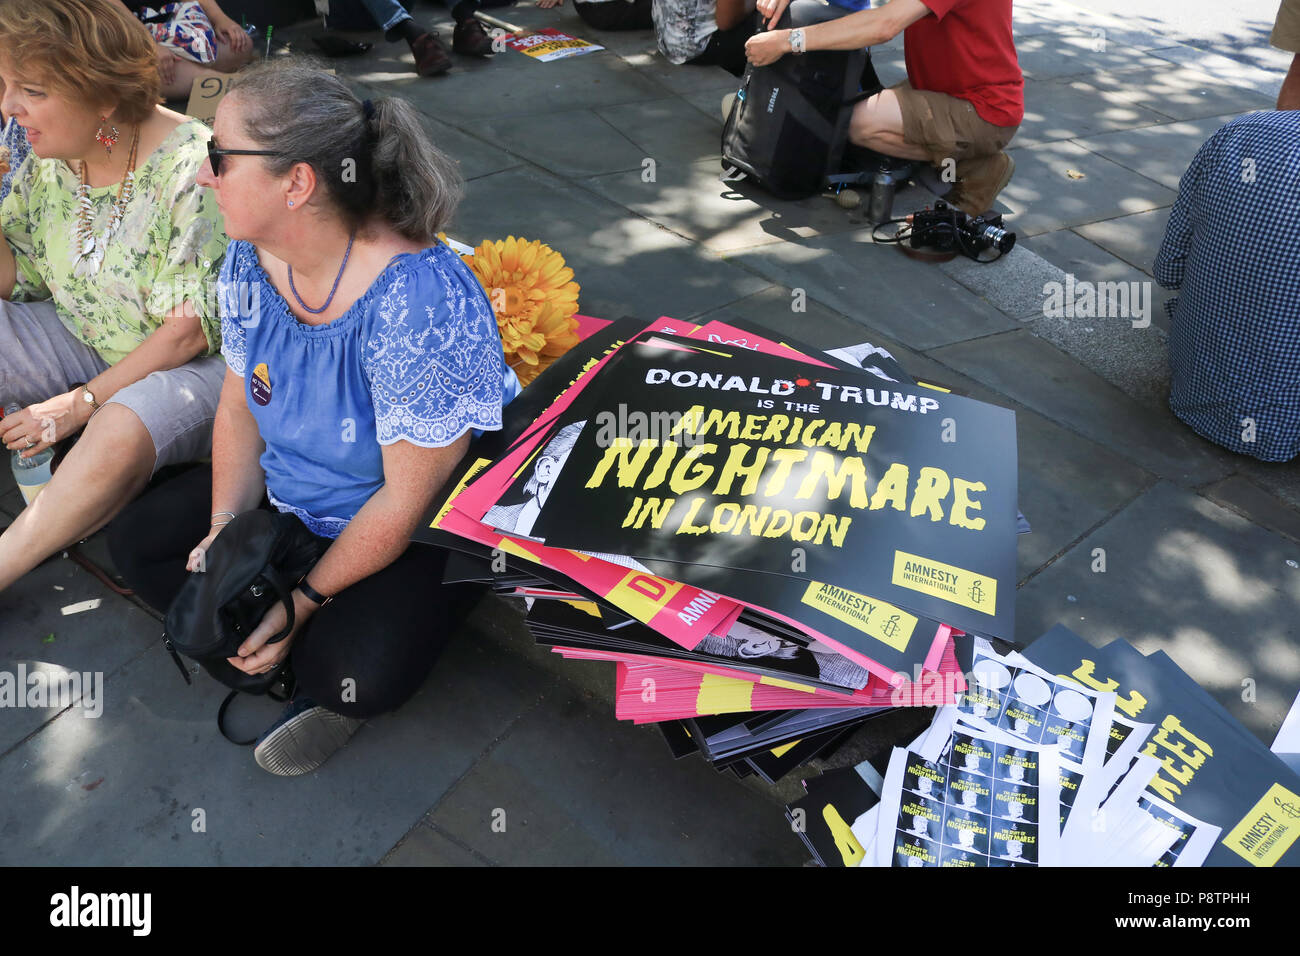 London UK. 13th July 2018.  Protesters holding placards  demonstrate  against the UK visit  of President Donald Trump as tens of thousands of protesters are expected to march to voice their displeasure against  the controversial policies of President Trump on immigration, climate change and Islamophobia. Trump dealt a double blow to U.K. Prime Minister Theresa May,criticising her plans for a soft Brexit would likely end hopes of a trade deal with the U.S. and that Boris Johnson, who quit her cabinet this week, would be a 'great' leader Credit: amer ghazzal/Alamy Live News Stock Photo